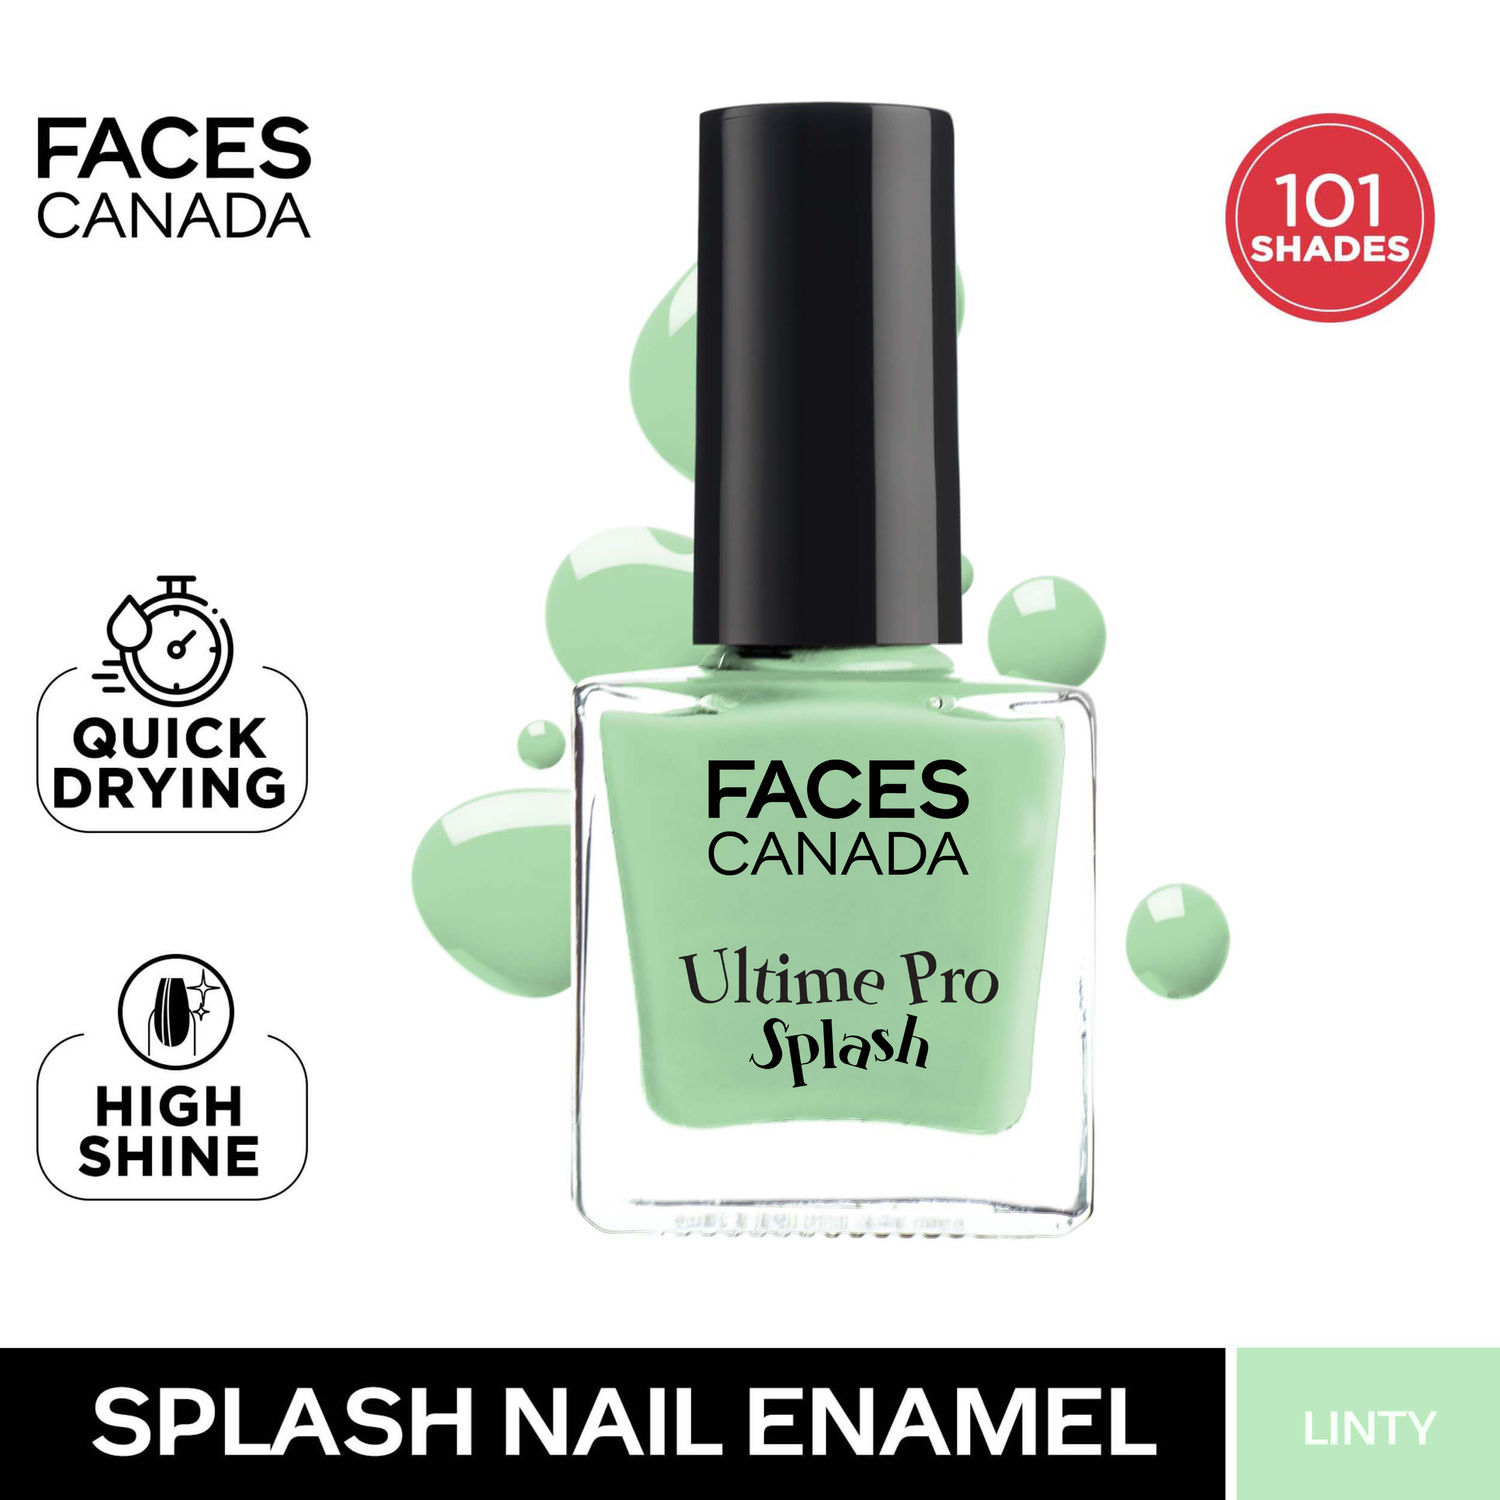 FACES CANADA SPLASH NAIL PAINT SWATCHES  INDIA  YouTube